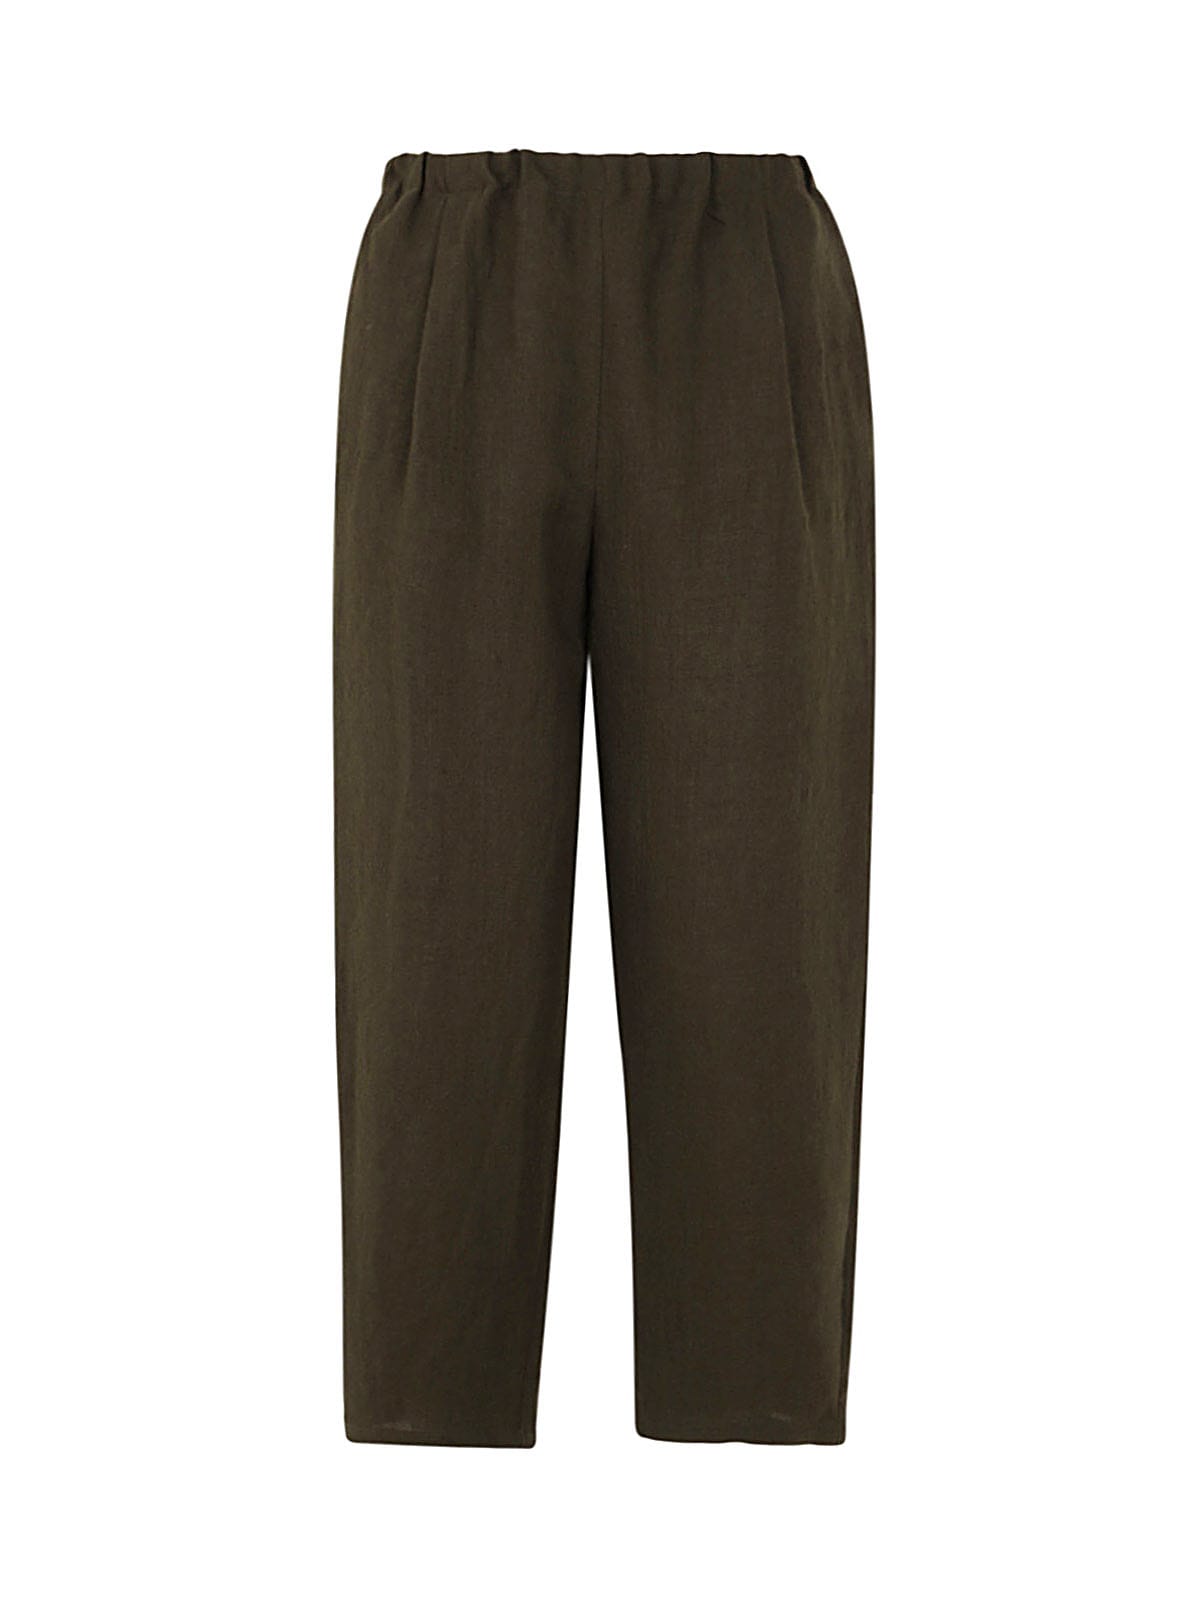 A Punto B Wool And Linen Elastic Slim Trousers